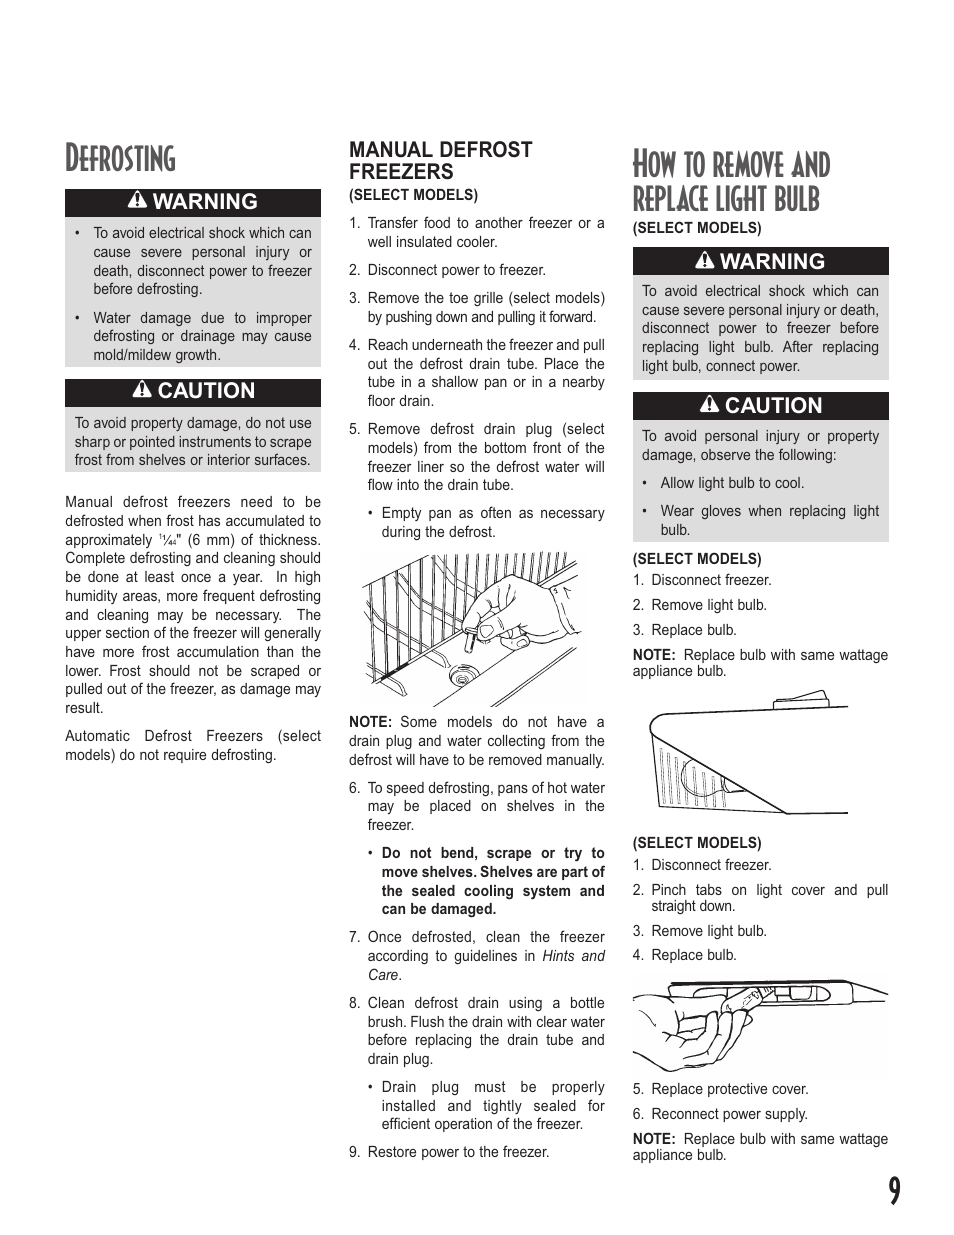 How to remove and replace light bulb, Defrosting, Caution | Warning, Manual defrost freezers | Maytag Upright Freezers User Manual | Page 9 / 48